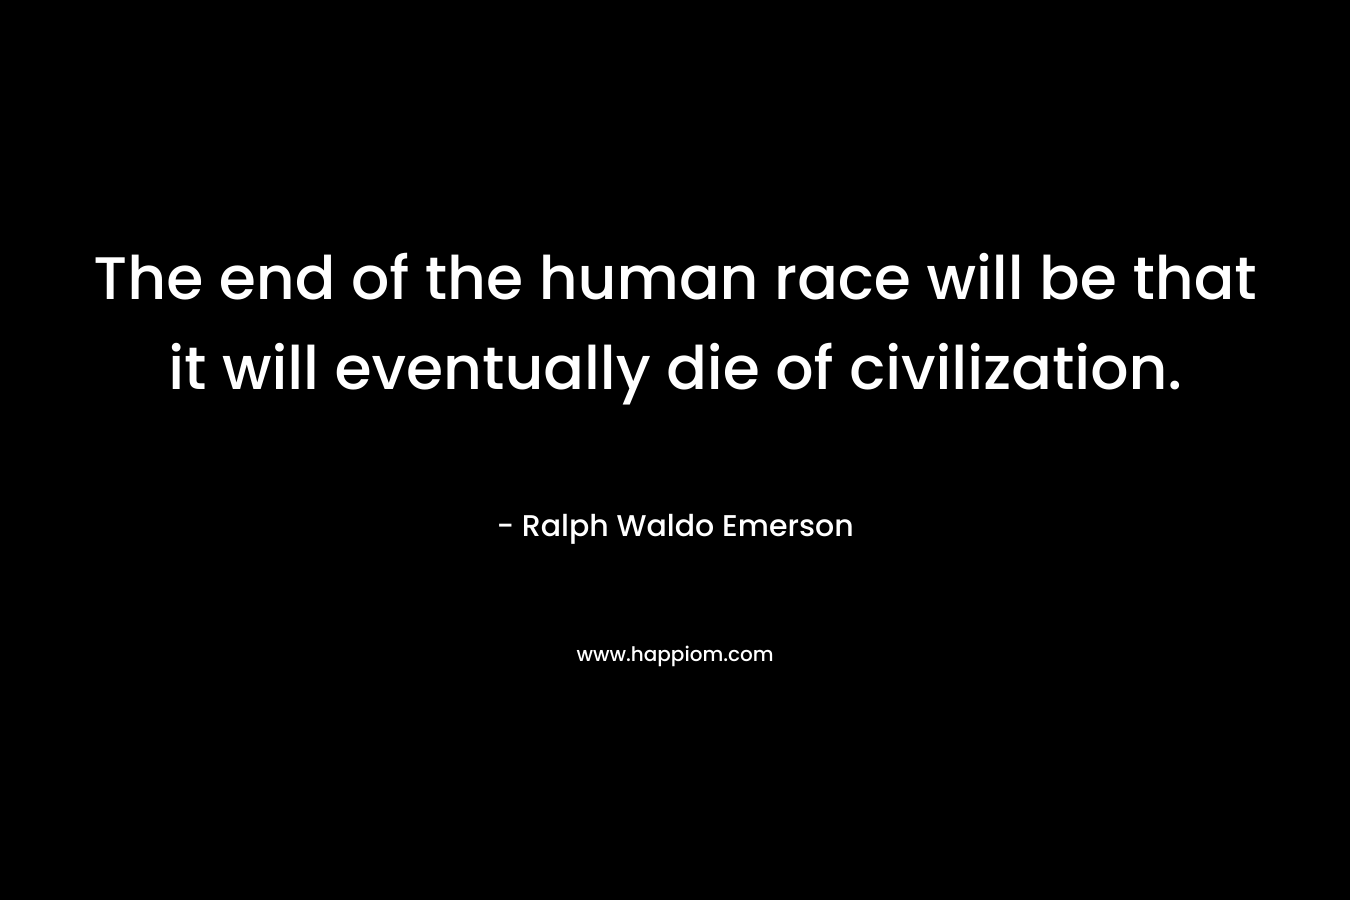 The end of the human race will be that it will eventually die of civilization. – Ralph Waldo Emerson